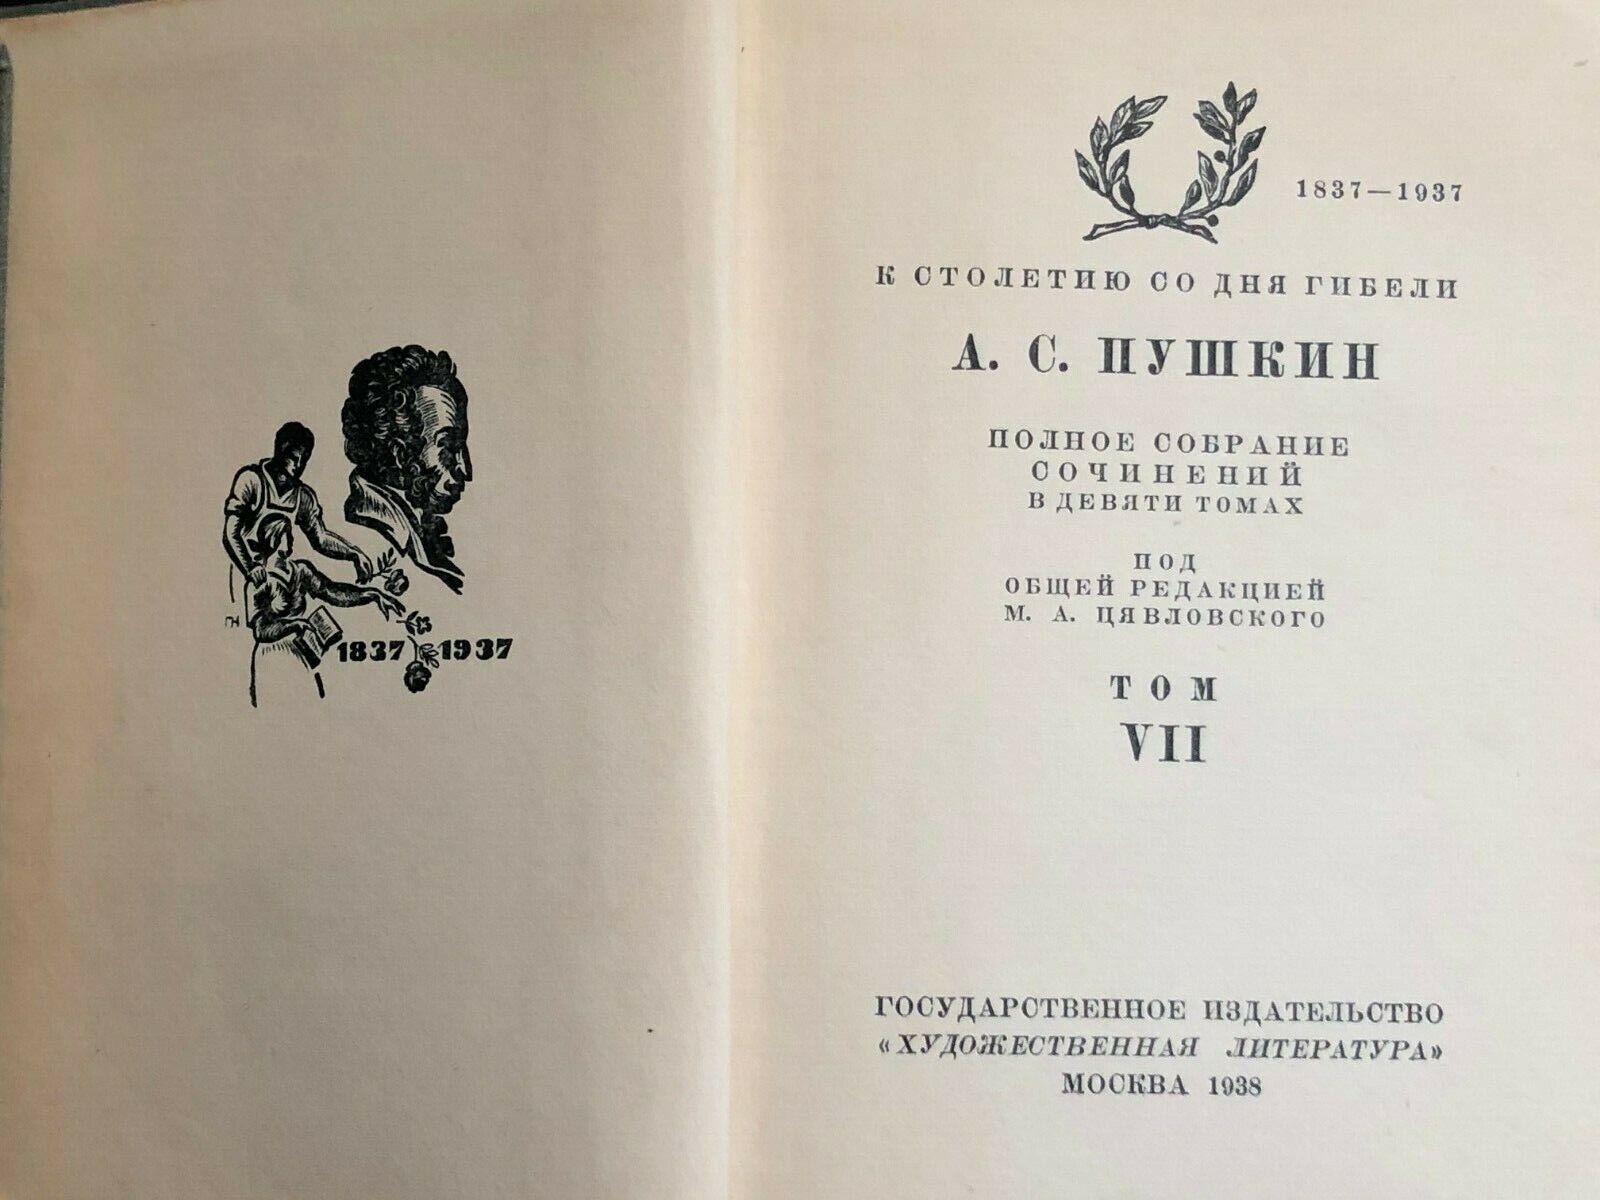 A. PUSHKIN 1935-1937 EDITION COMPLETE WORKS IN 9 MINI VOLUMES WITH COMMENTARIES Без бренда - фотография #9